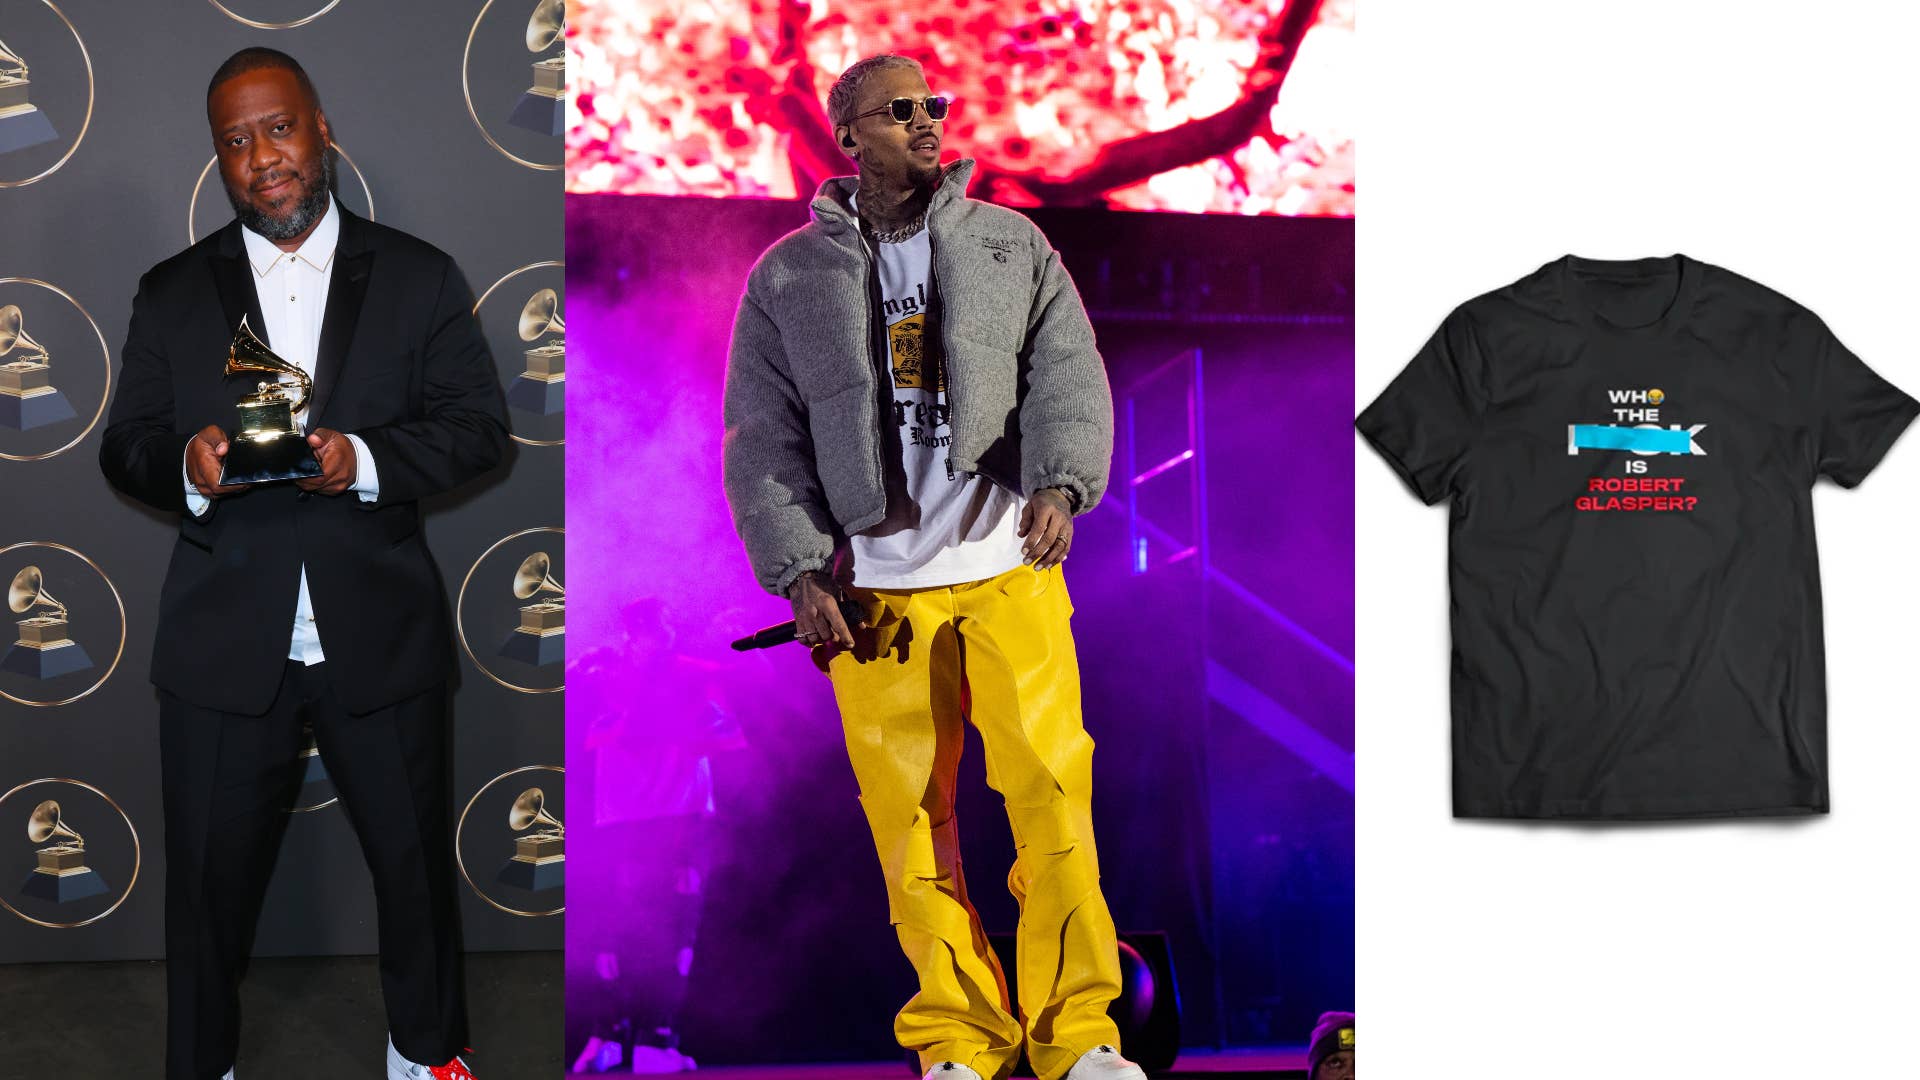 Robert Glasper Chris Brown and a charity t shirt are pictured